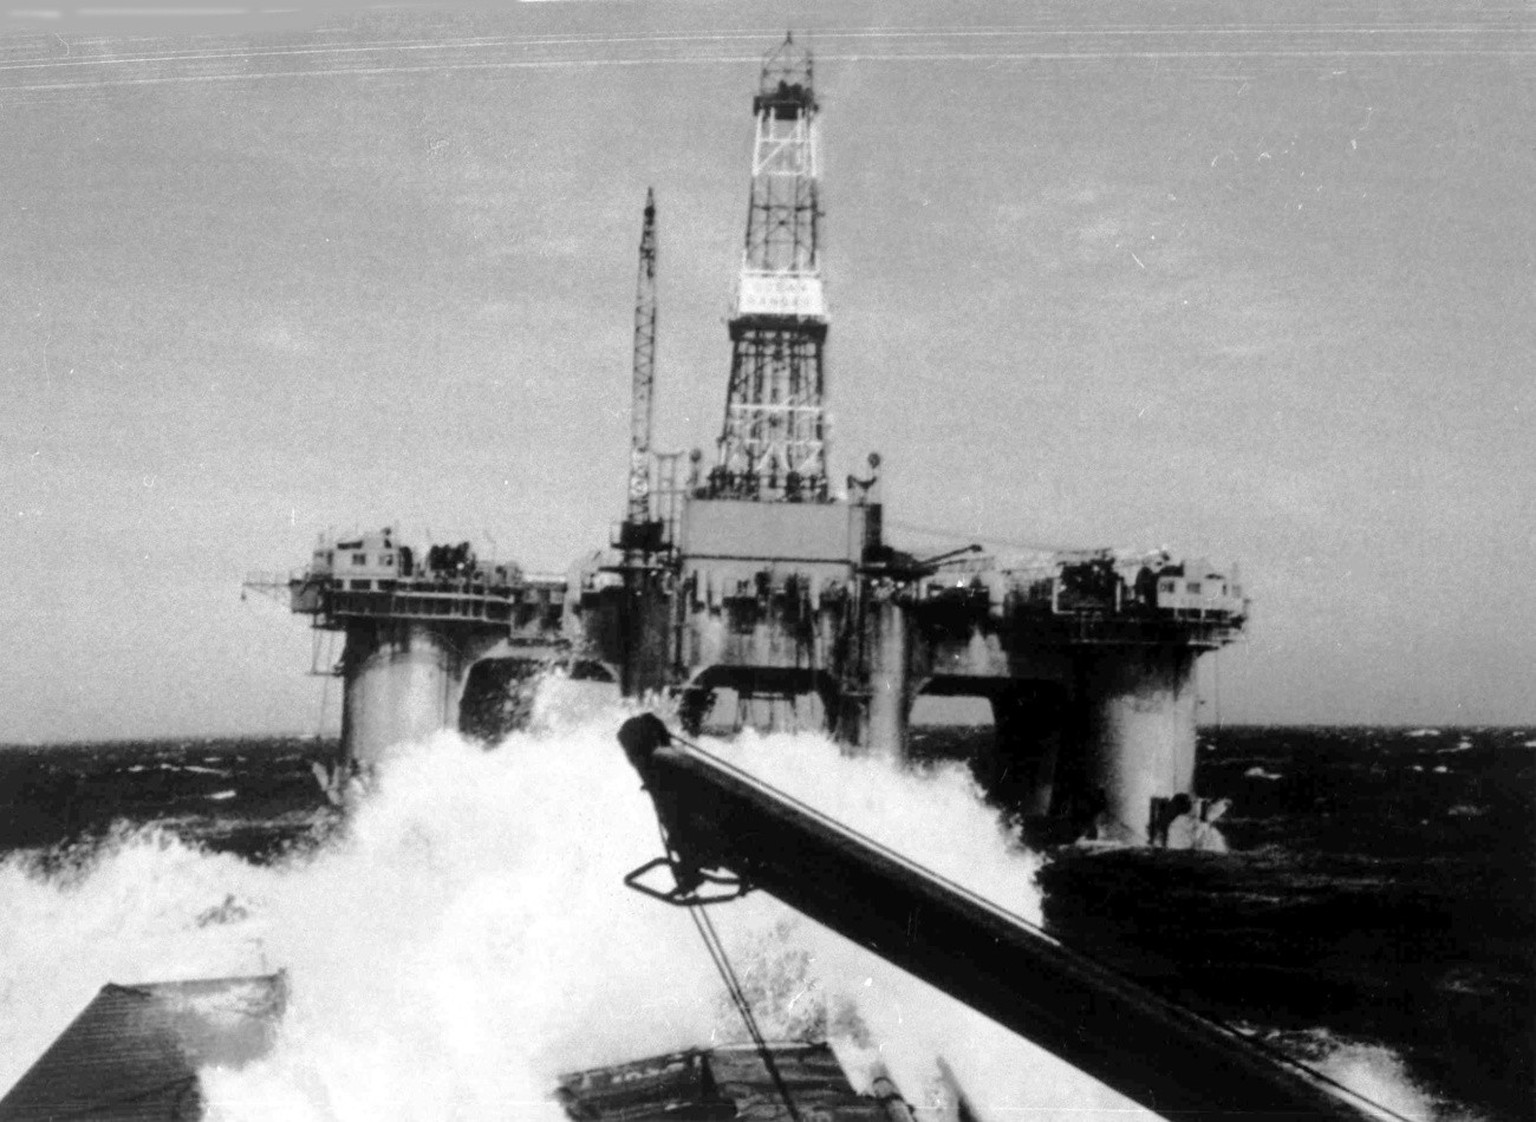 1981 photo of the Odeco Ocean Ranger Oil Rig, off Newfoundland, Canada. (AP Photo) BEST QUALITY AVAILABLE